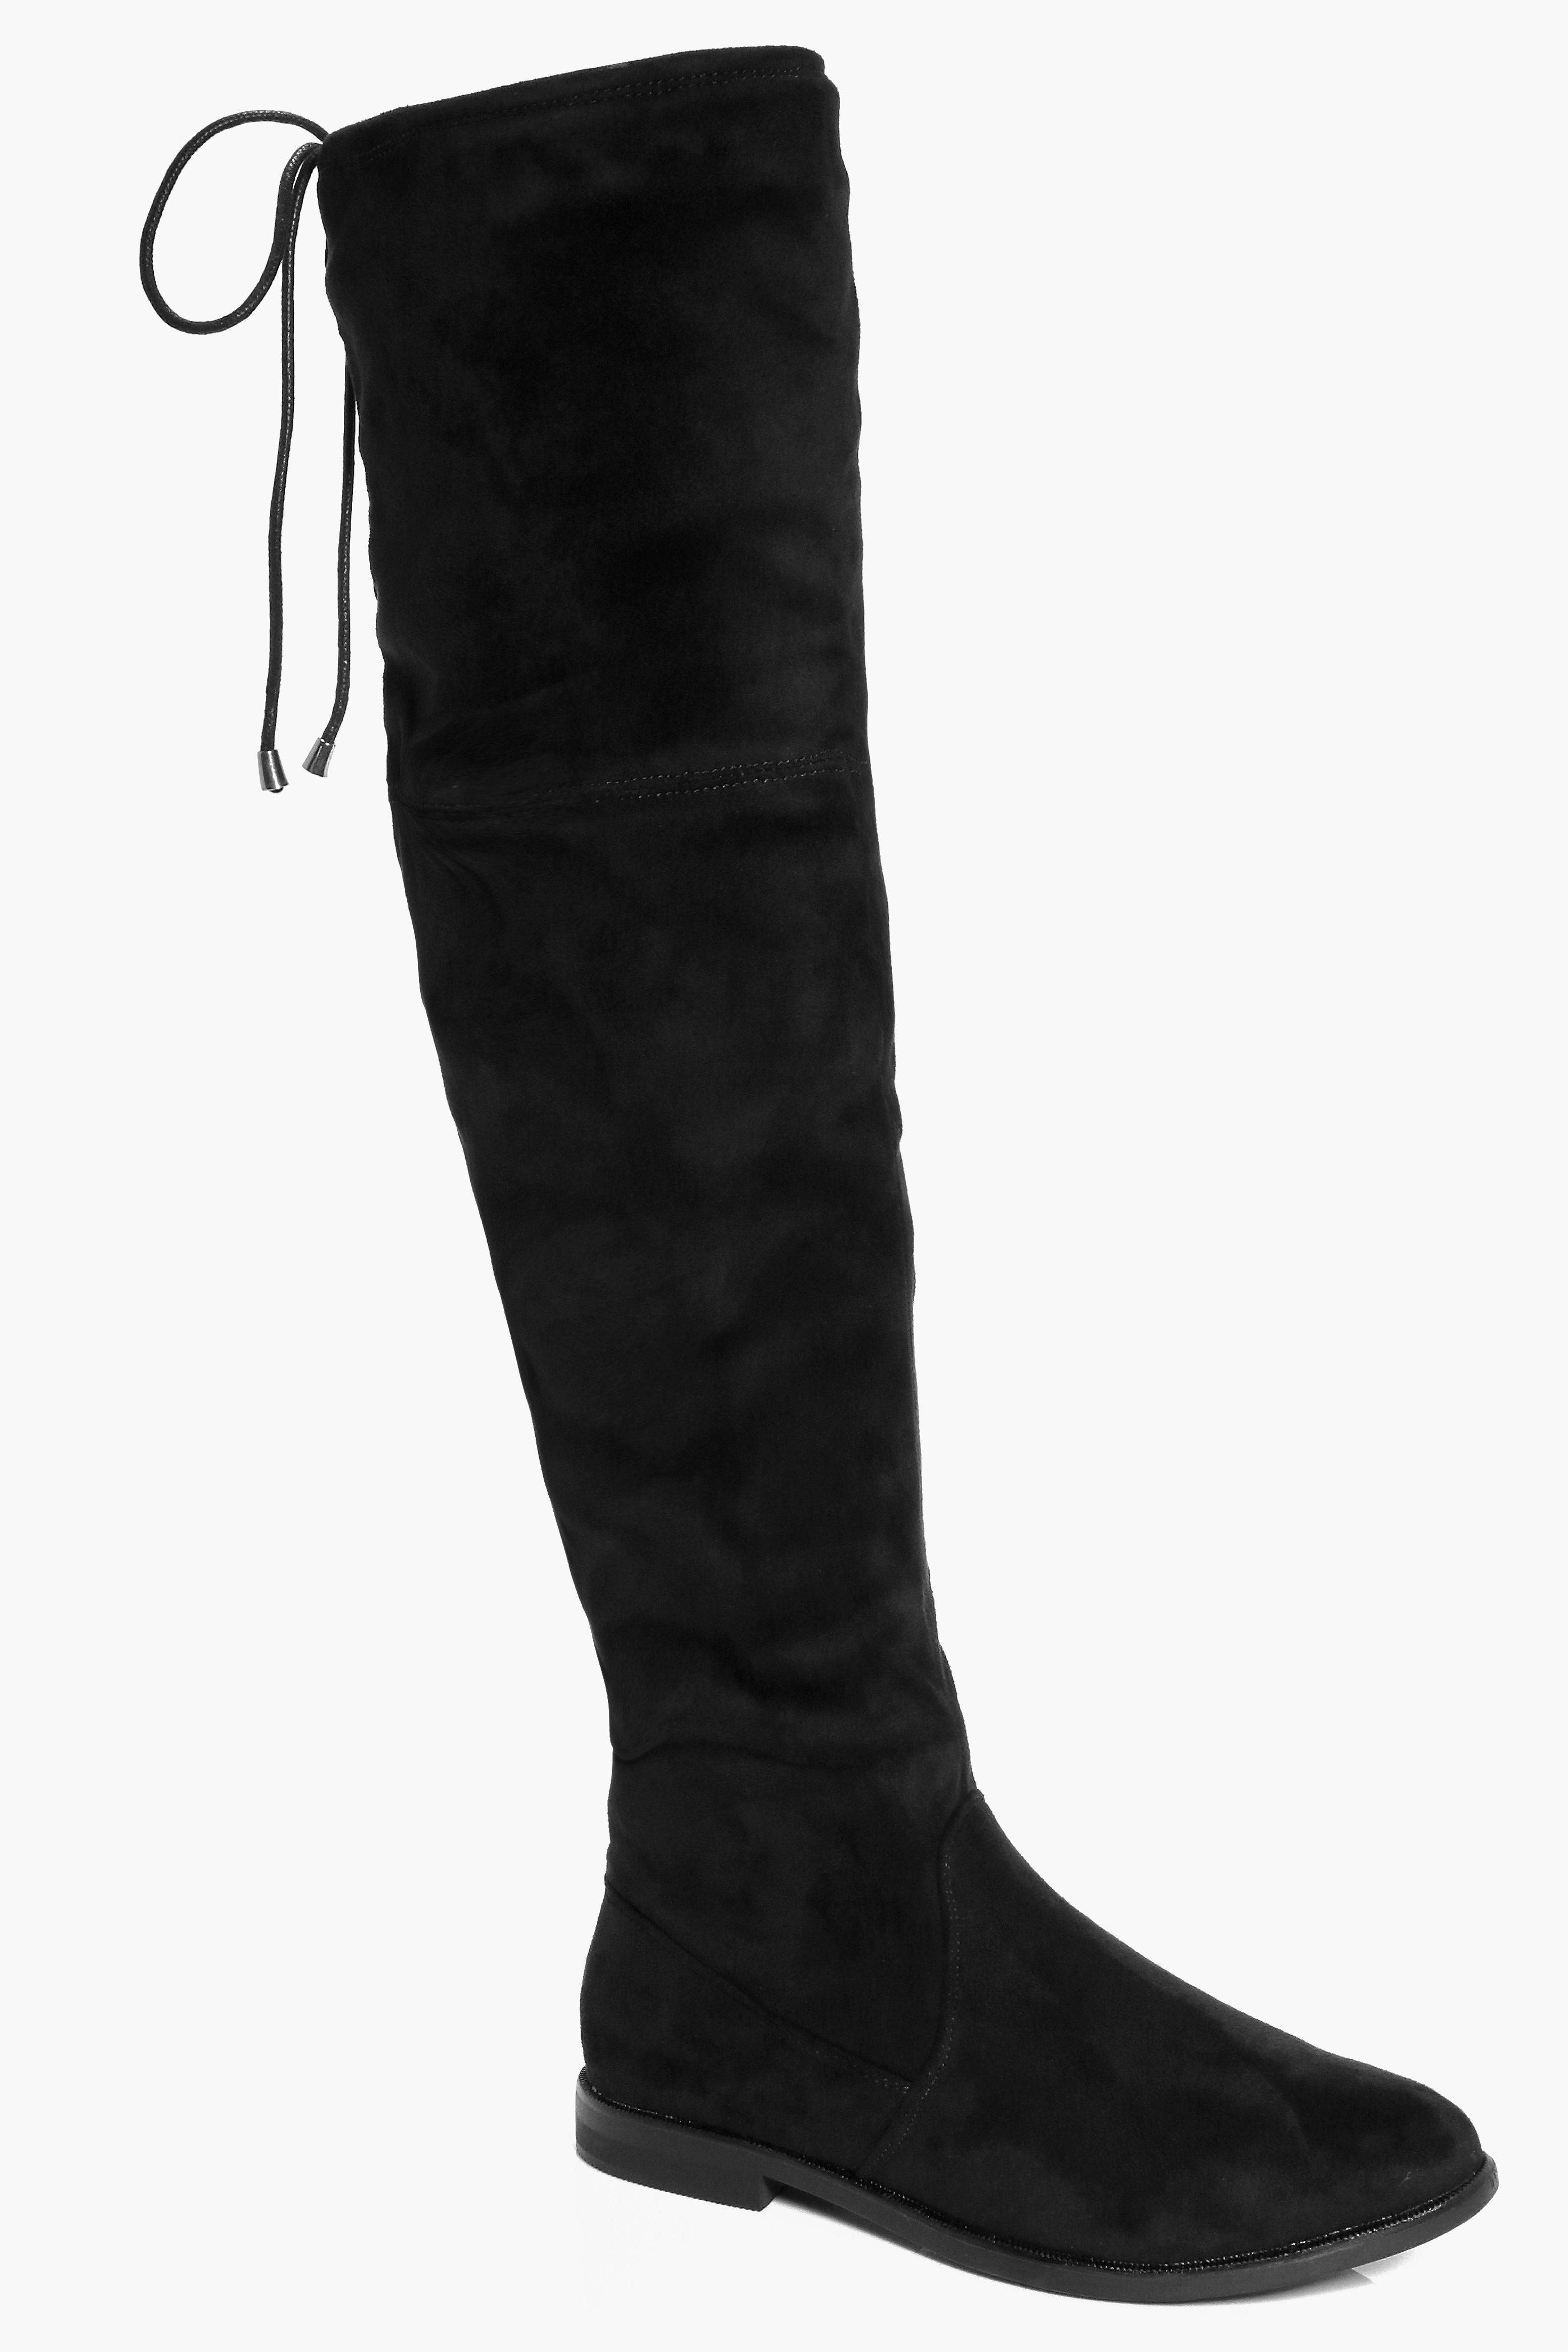 black flat over the knee high boots